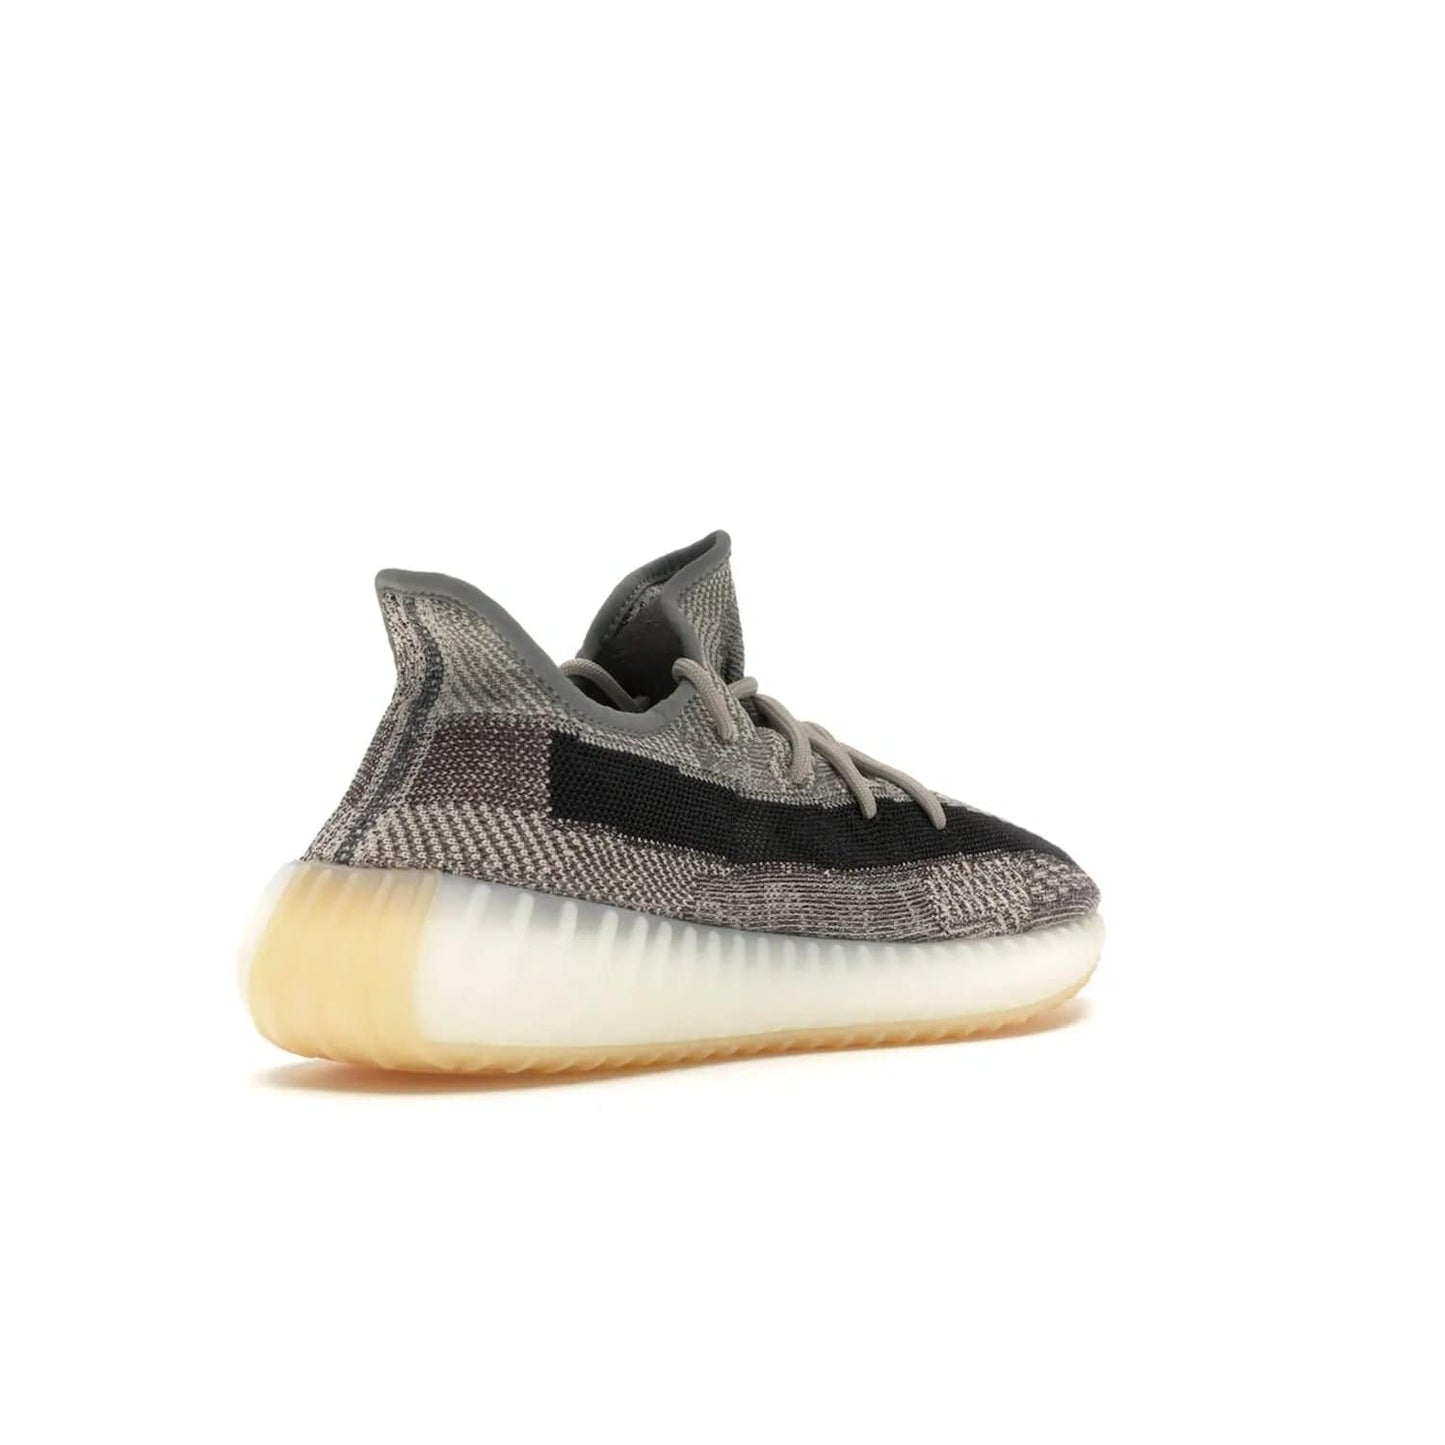 adidas Yeezy Boost 350 V2 Zyon - Image 32 - Only at www.BallersClubKickz.com - Step up your style game with the adidas Yeezy Boost 350 V2 Zyon. This sleek sneaker features a Primeknit upper, dark side stripe, translucent Boost sole, and creamy white interior providing style and comfort. Get them now!